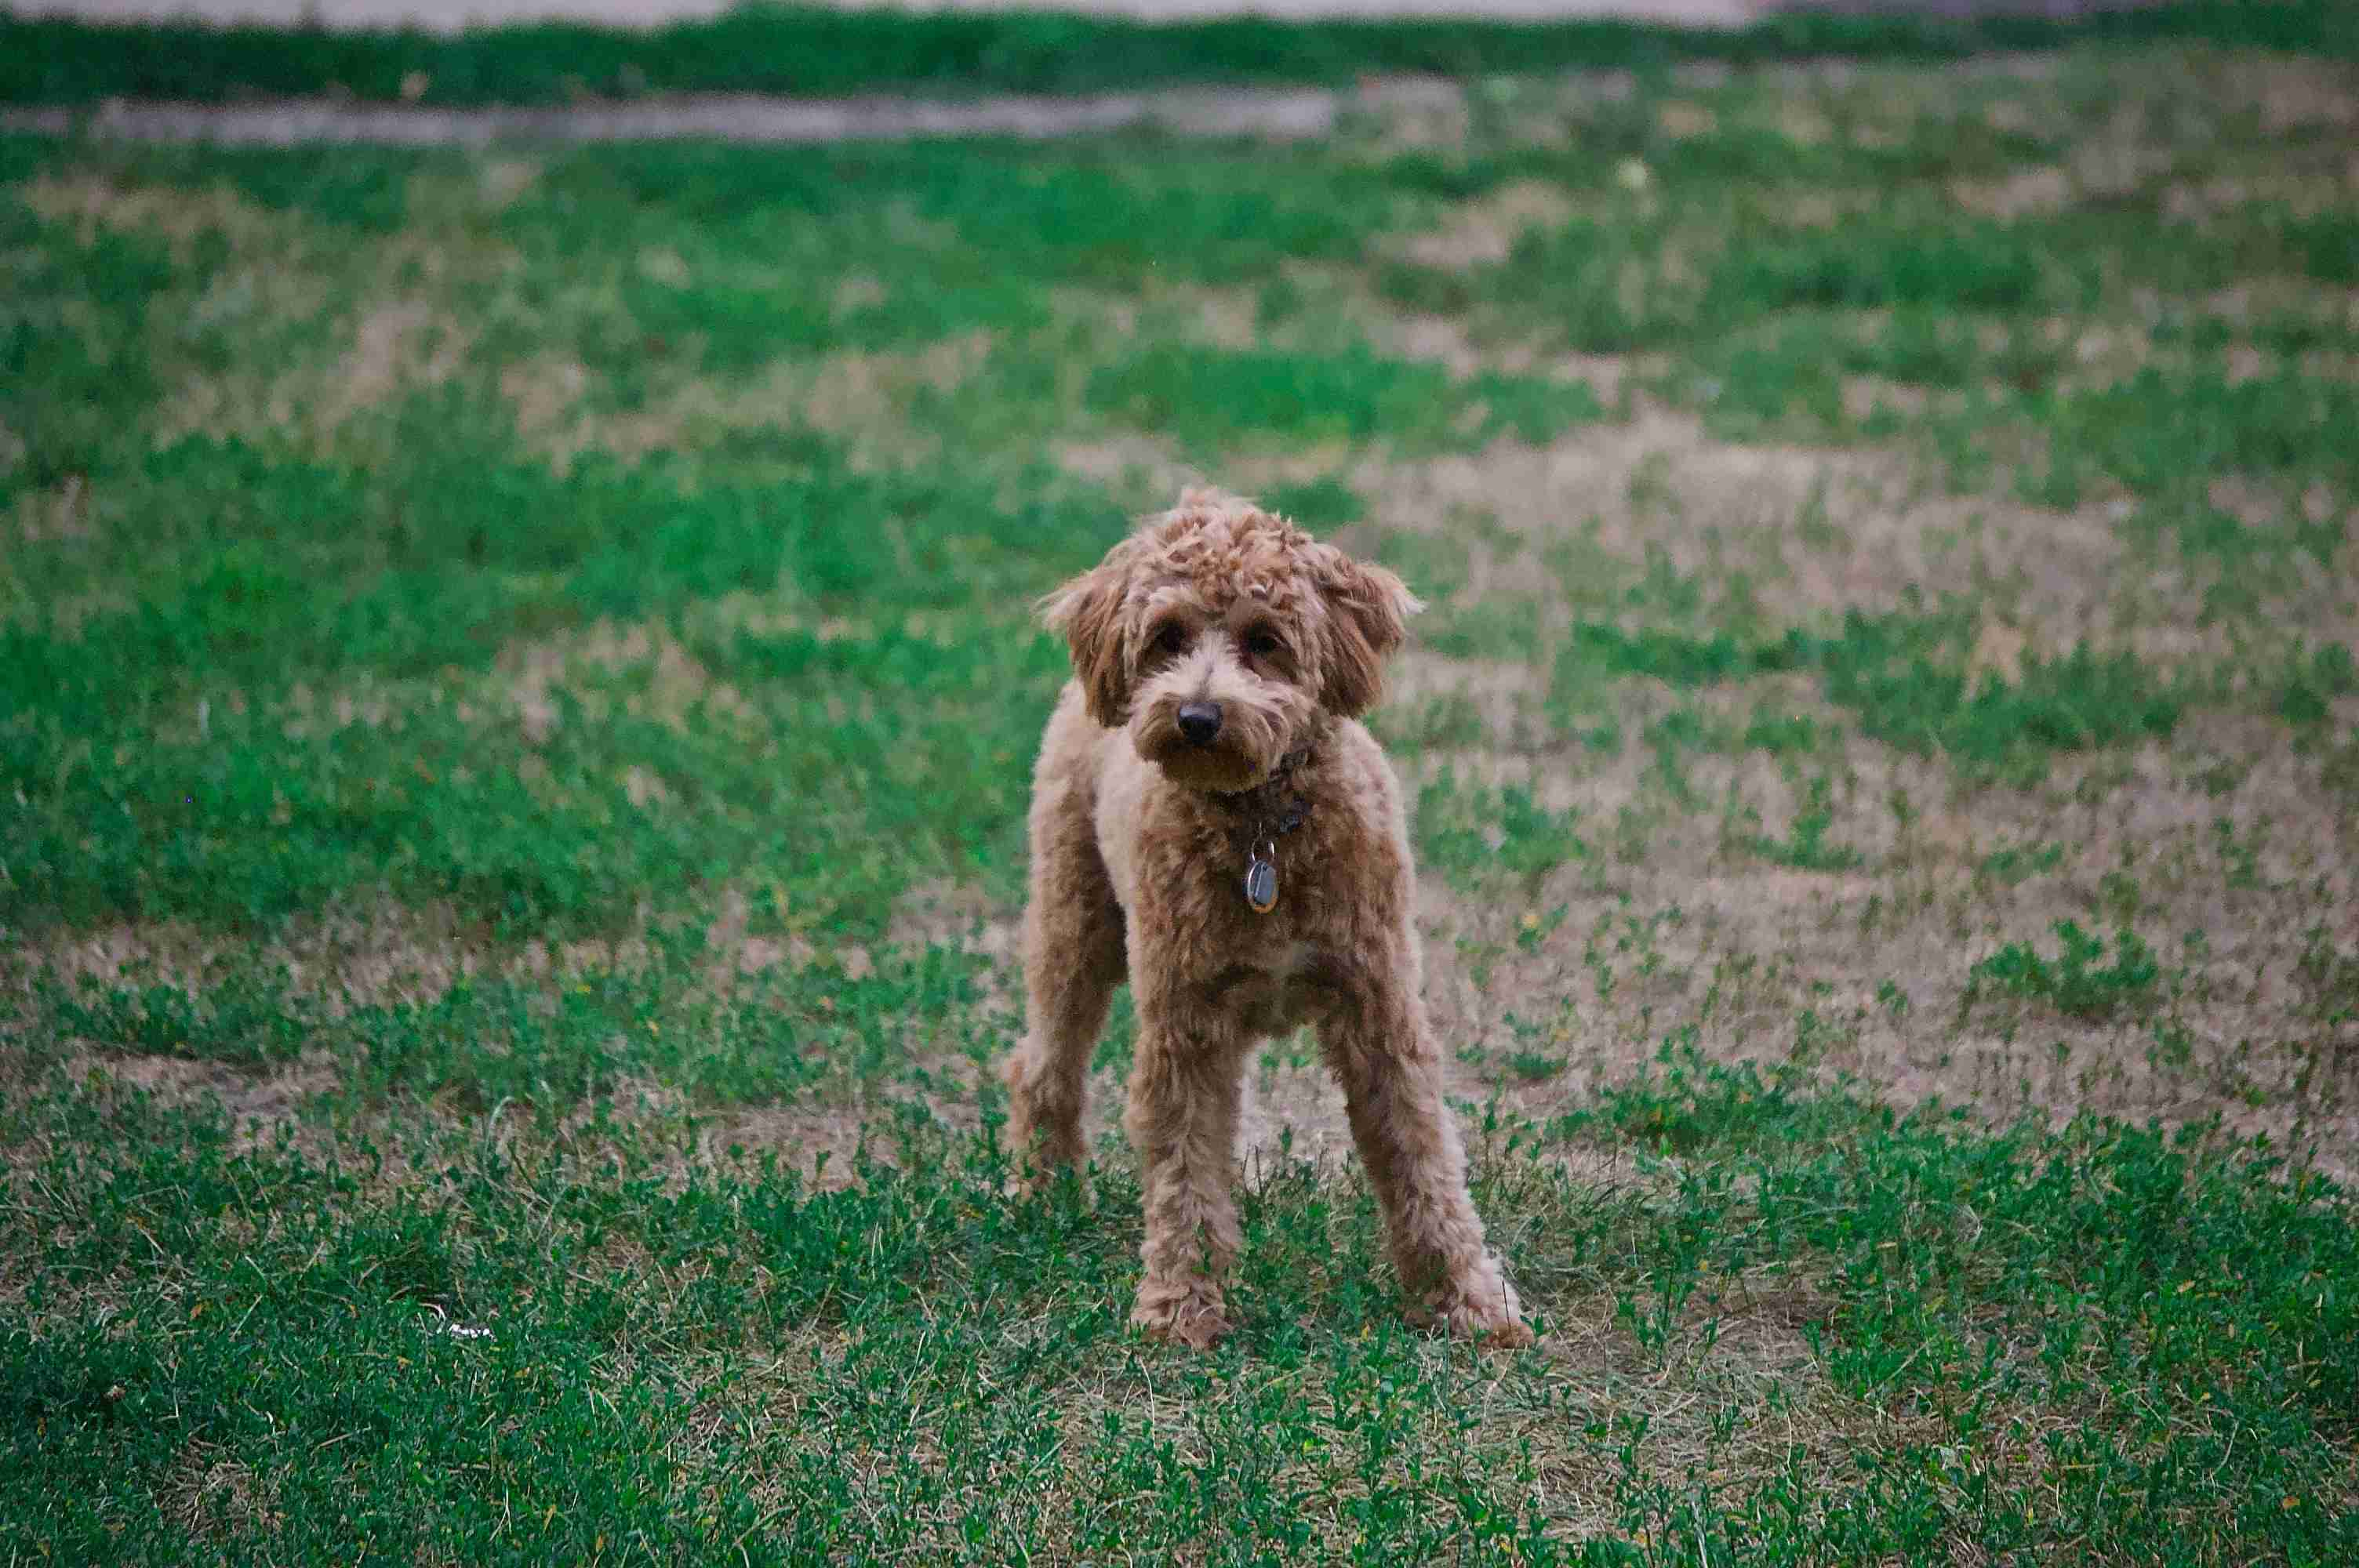 Do Poodles tend to develop respiratory problems? How can they be managed?